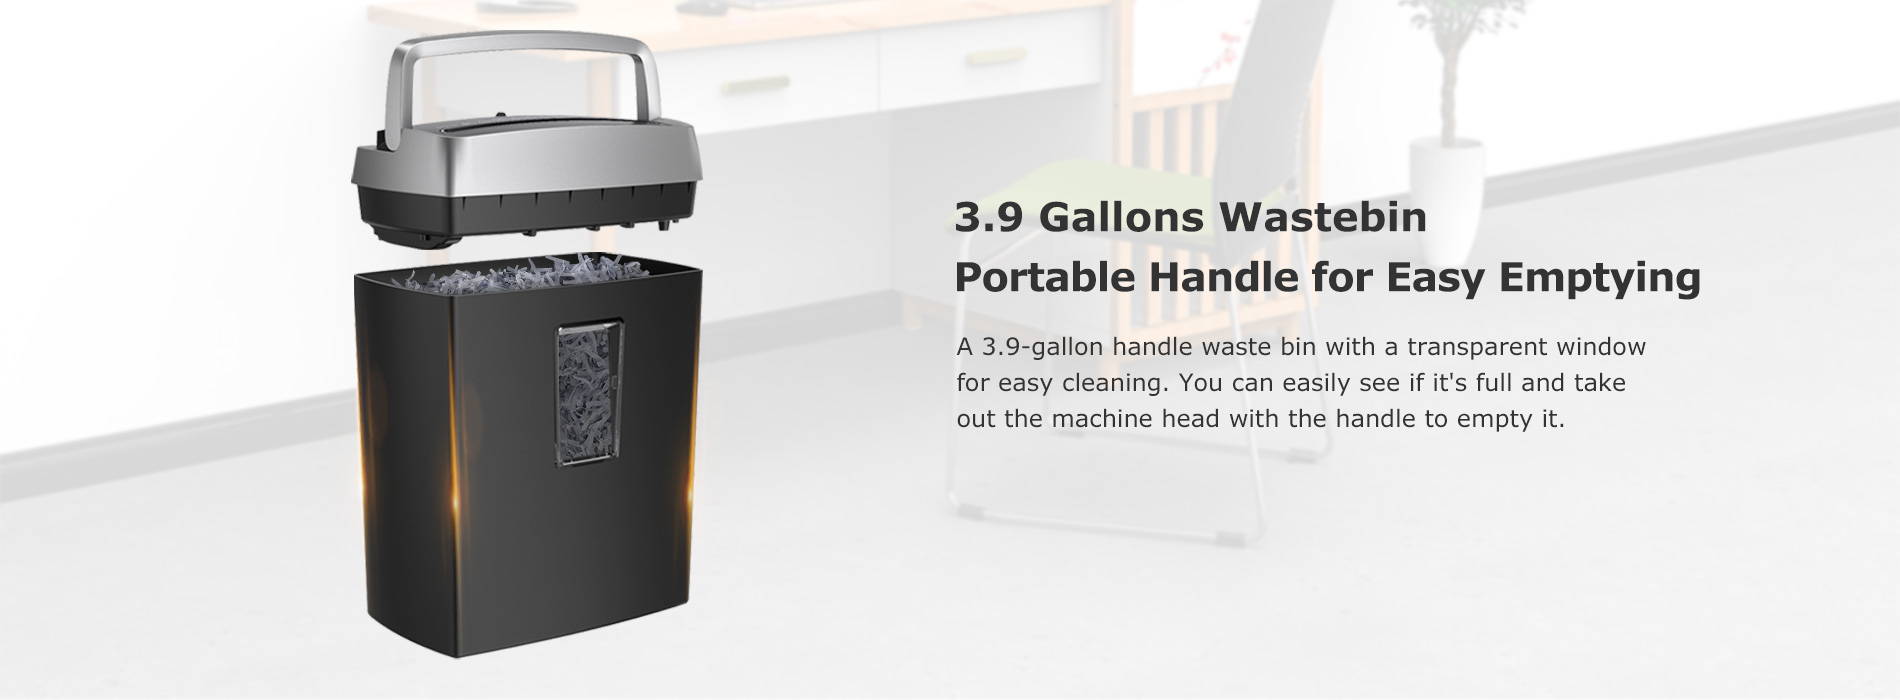 3.9 Gallons Wastebin Portable Handle for Easy Emptying A 3.9-gallon handle waste bin with a transparent window for easy cleaning. You can easily see if it's full and take out the machine head with the handle to empty it.